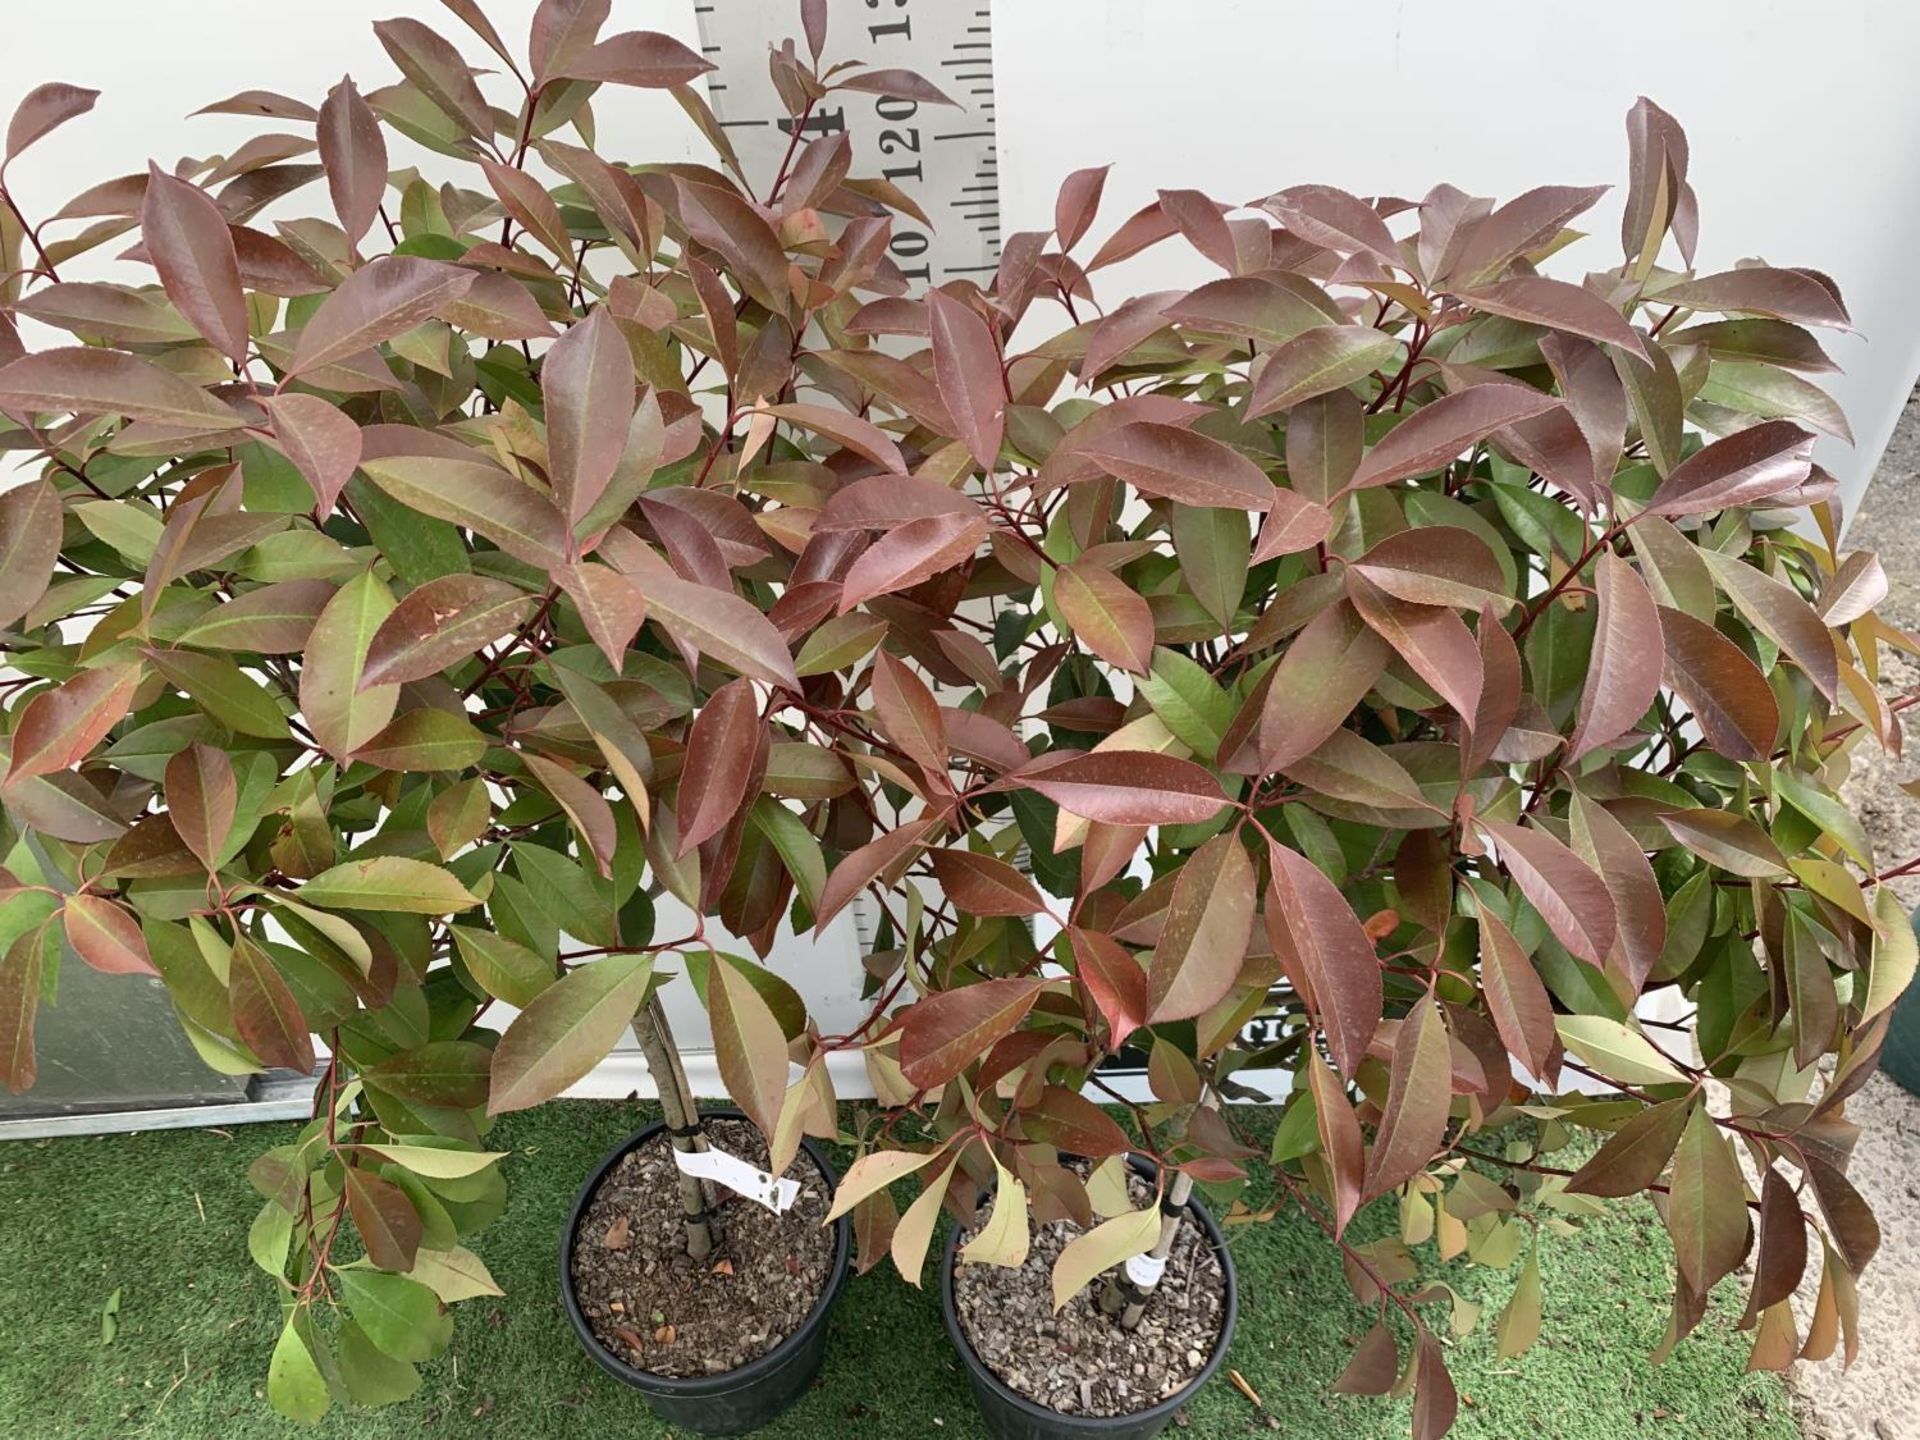 A PAIR OF STANDARD PHOTINIA FRASERI RED ROBIN TREES 140CM TALL IN A 10 LTR POT TO BE SOLD FOR THE - Image 4 of 8